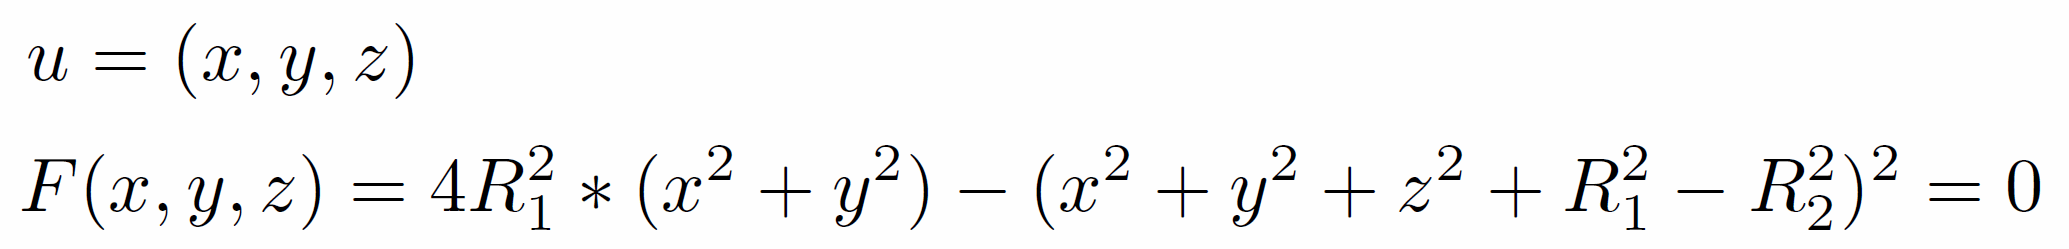 Equation of a torus as a map from R^3 into R^1